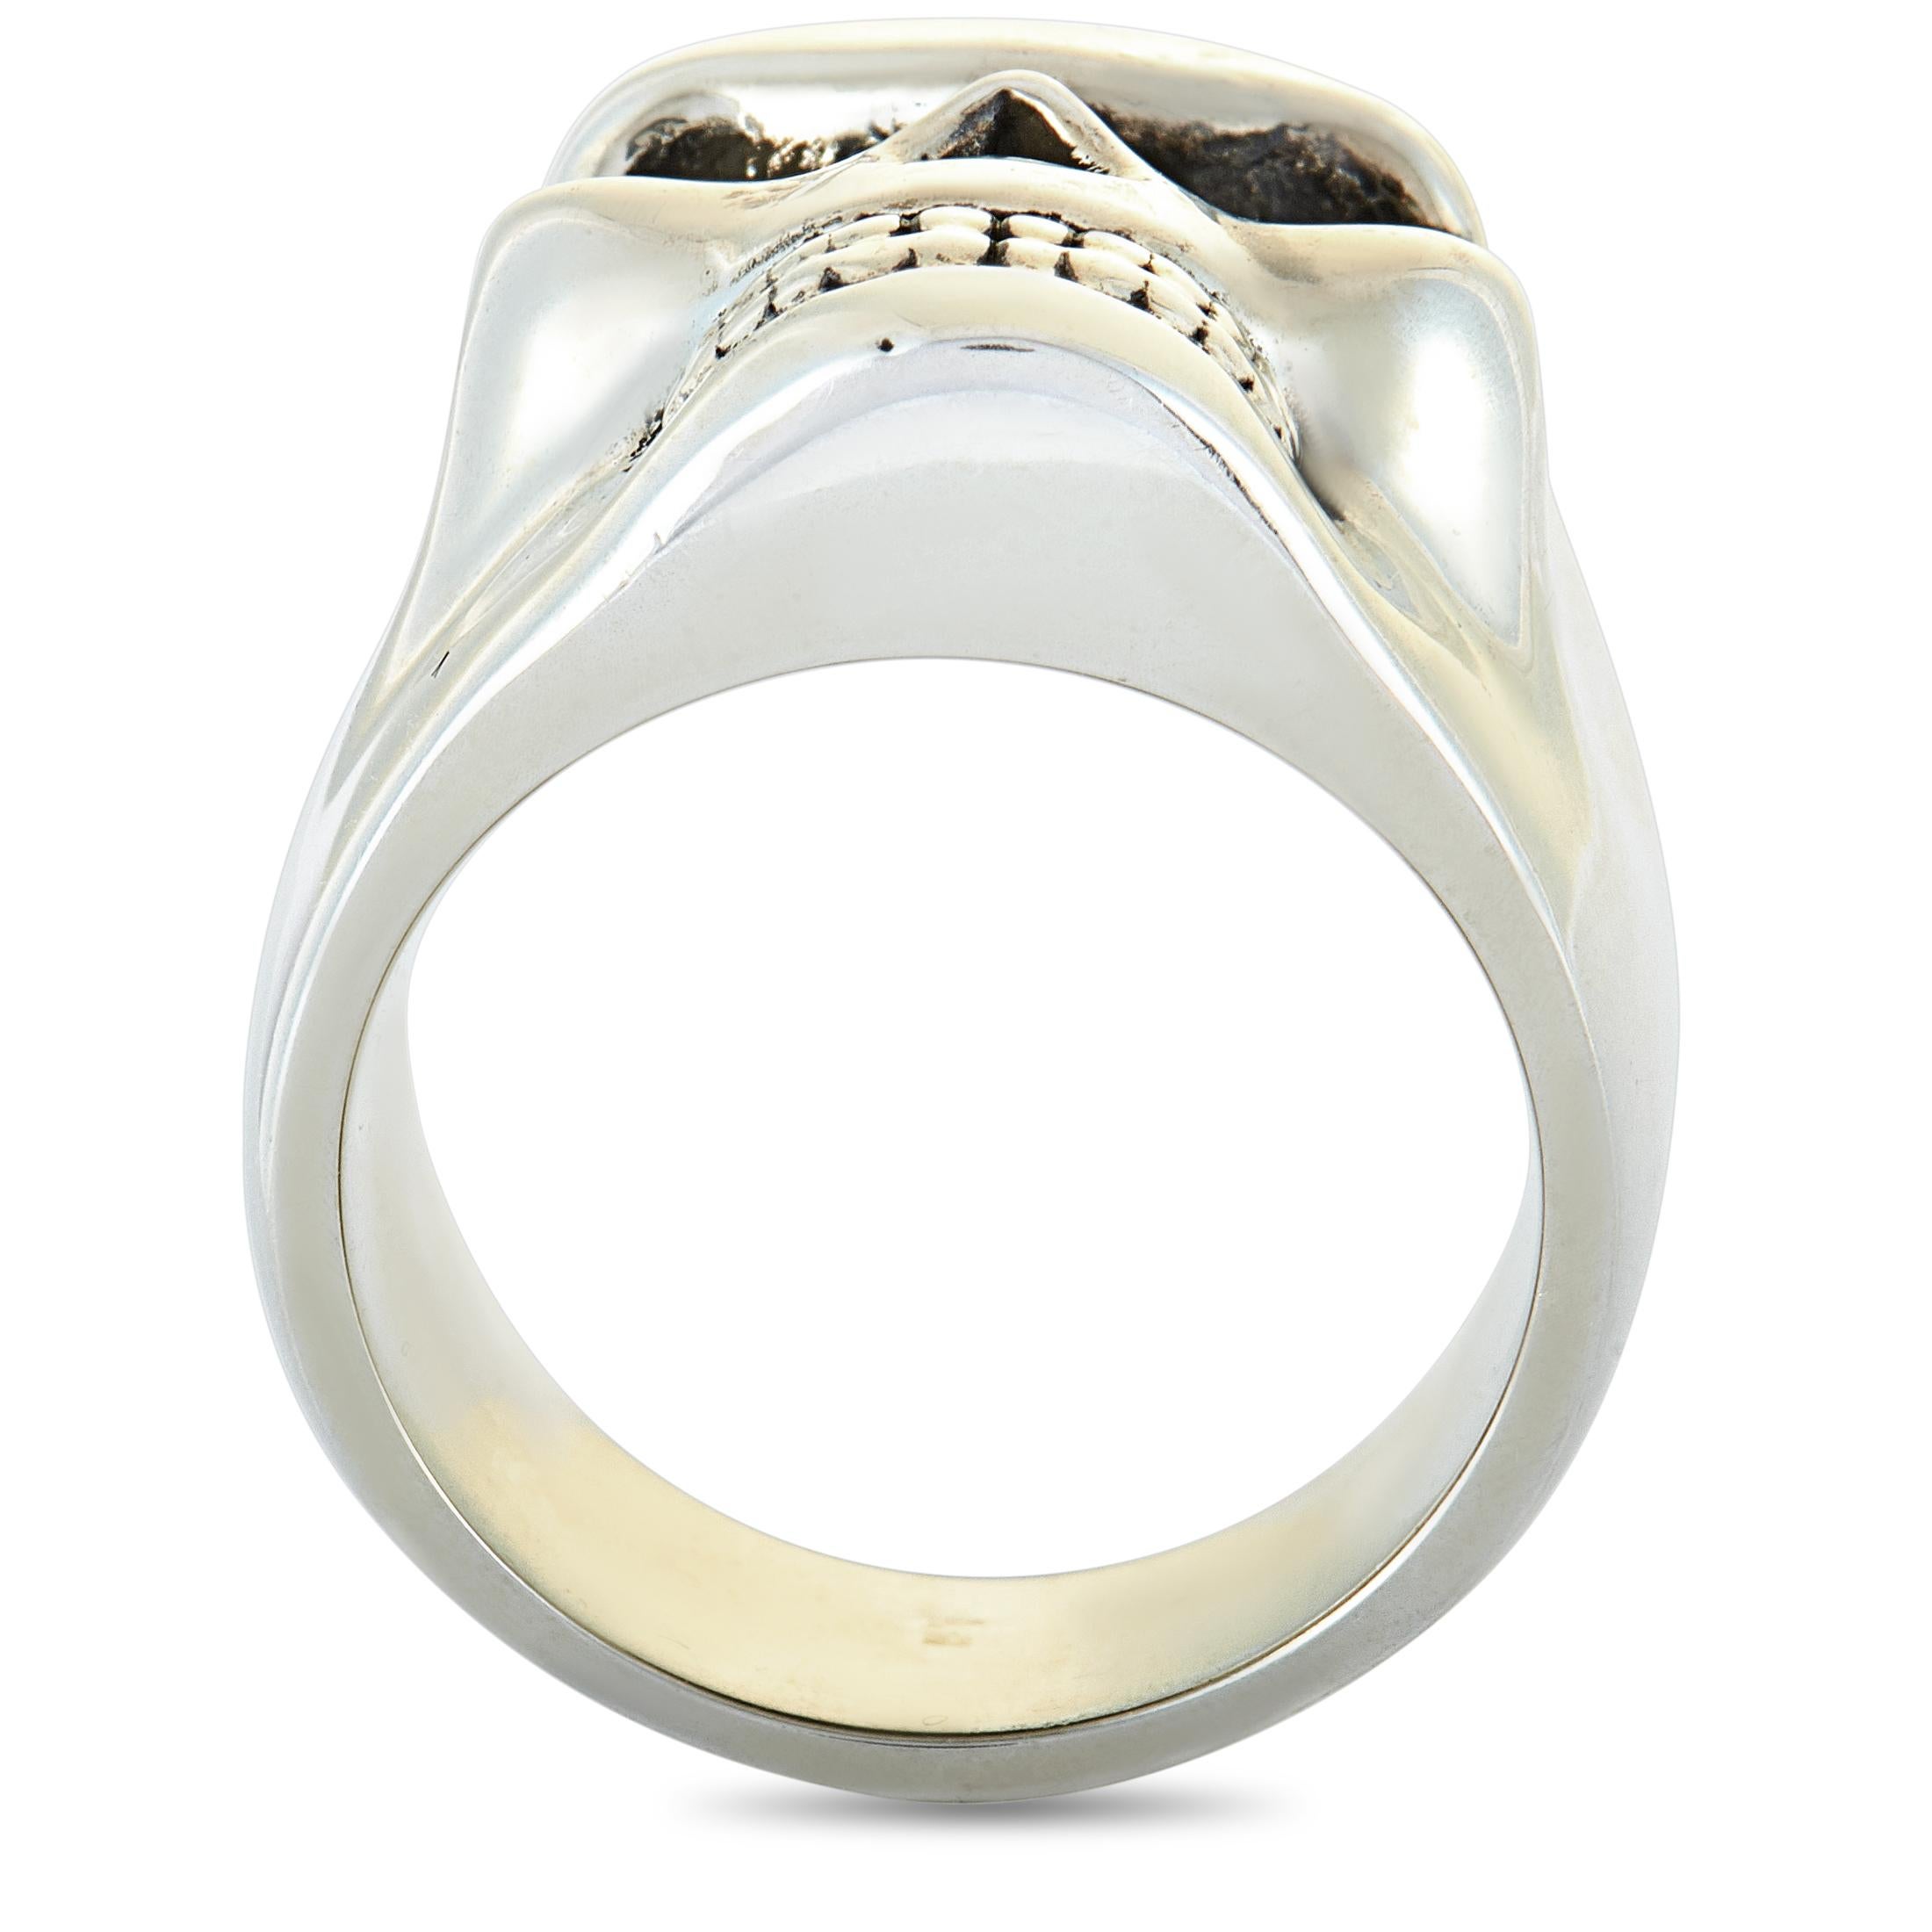 This King Baby ring is crafted from sterling silver and weighs 23.8 grams. The ring boasts band thickness of 9 mm and top height of 5 mm, while top dimensions measure 15 by 22 mm.
Ring Size: 7, 8, 9

Offered in brand new condition, this jewelry